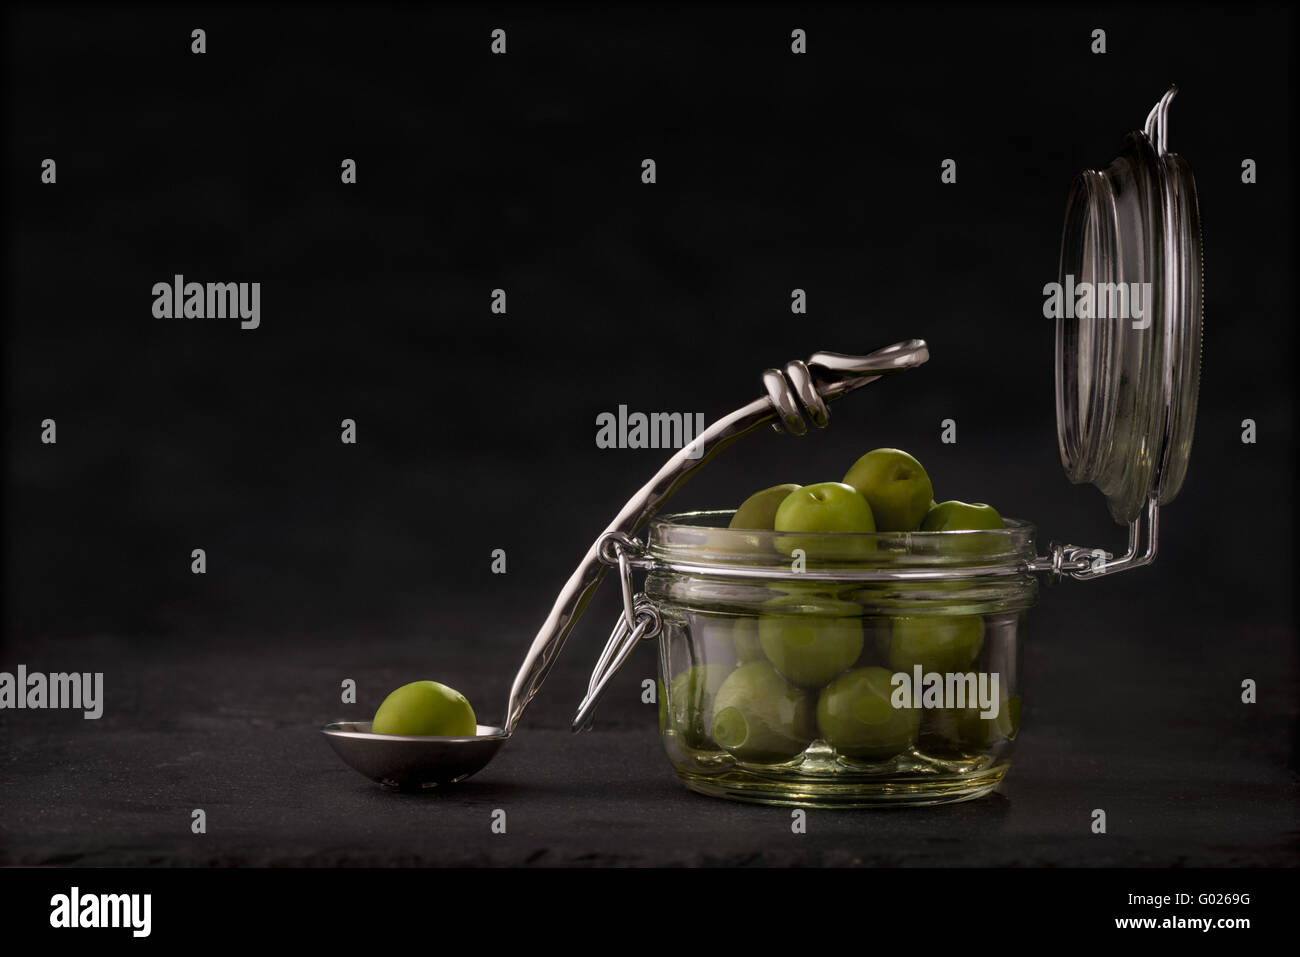 Jar of green olives with single olive on spoon against grey slate background. Stock Photo